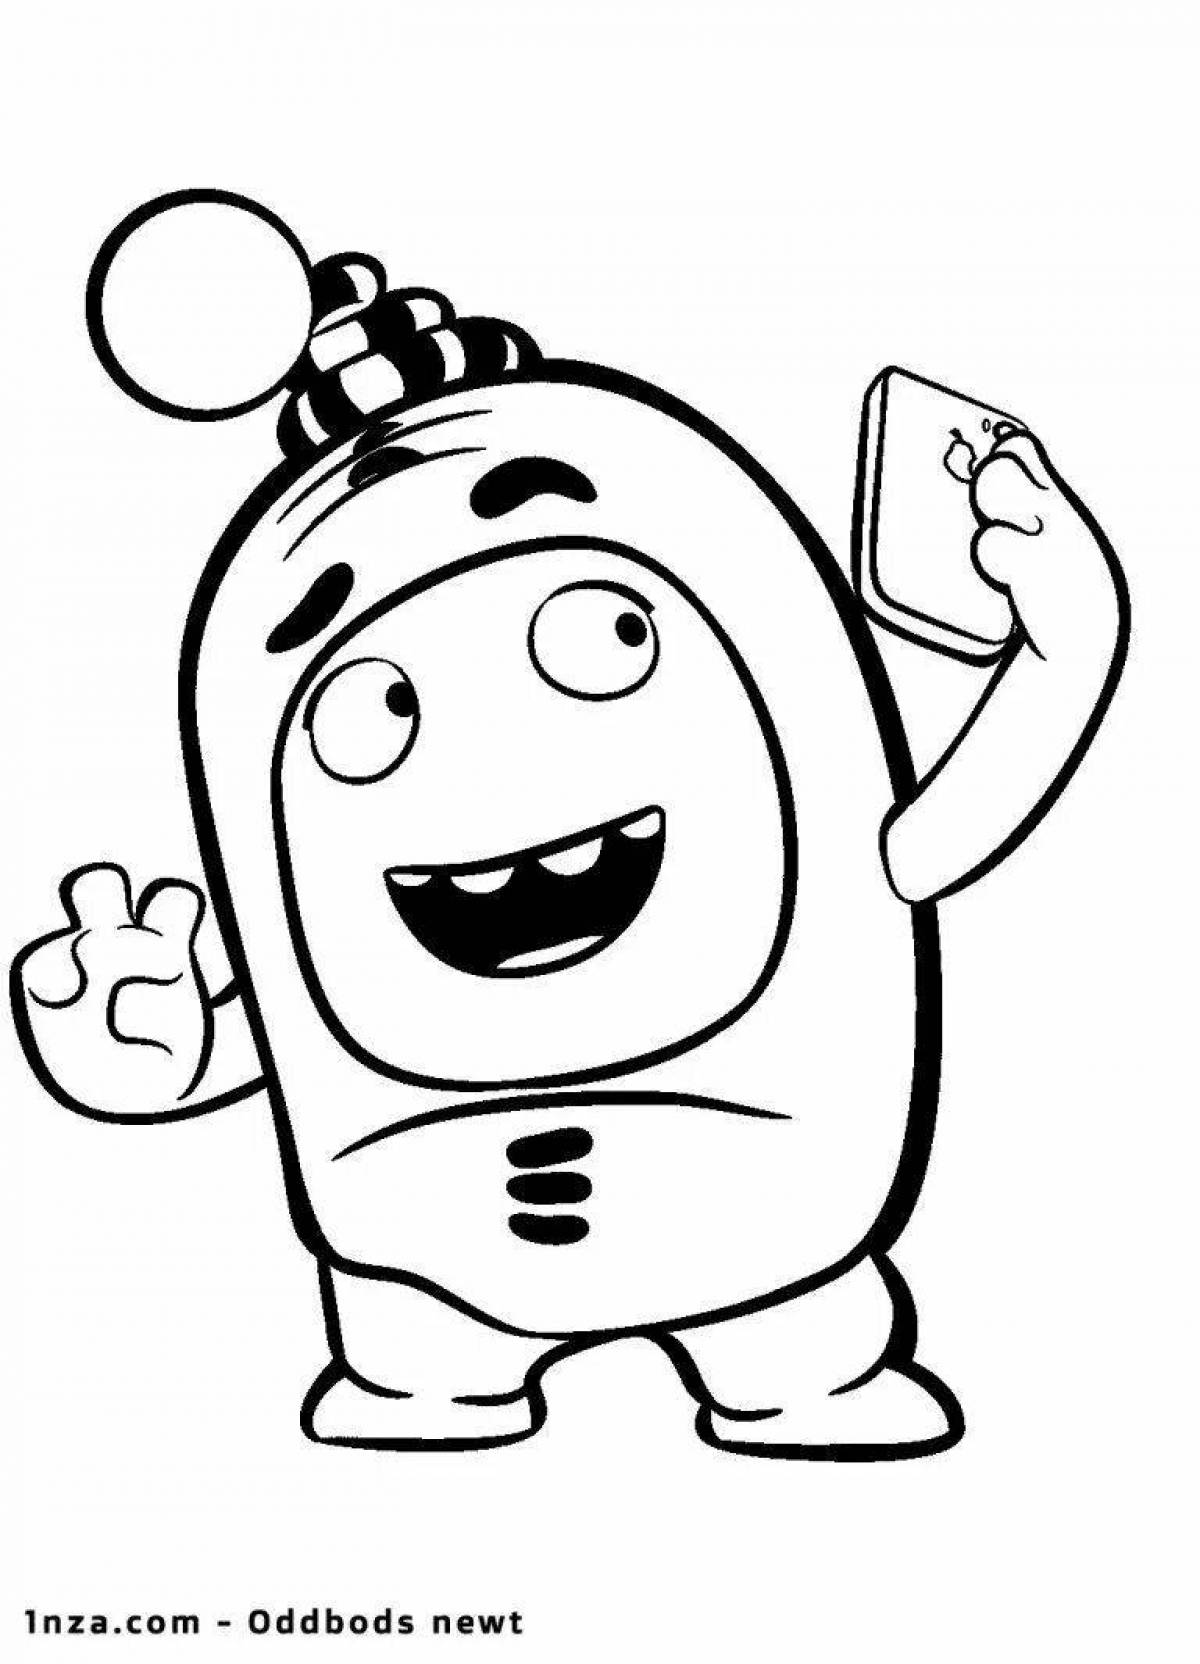 Animated coloring pages oddbods